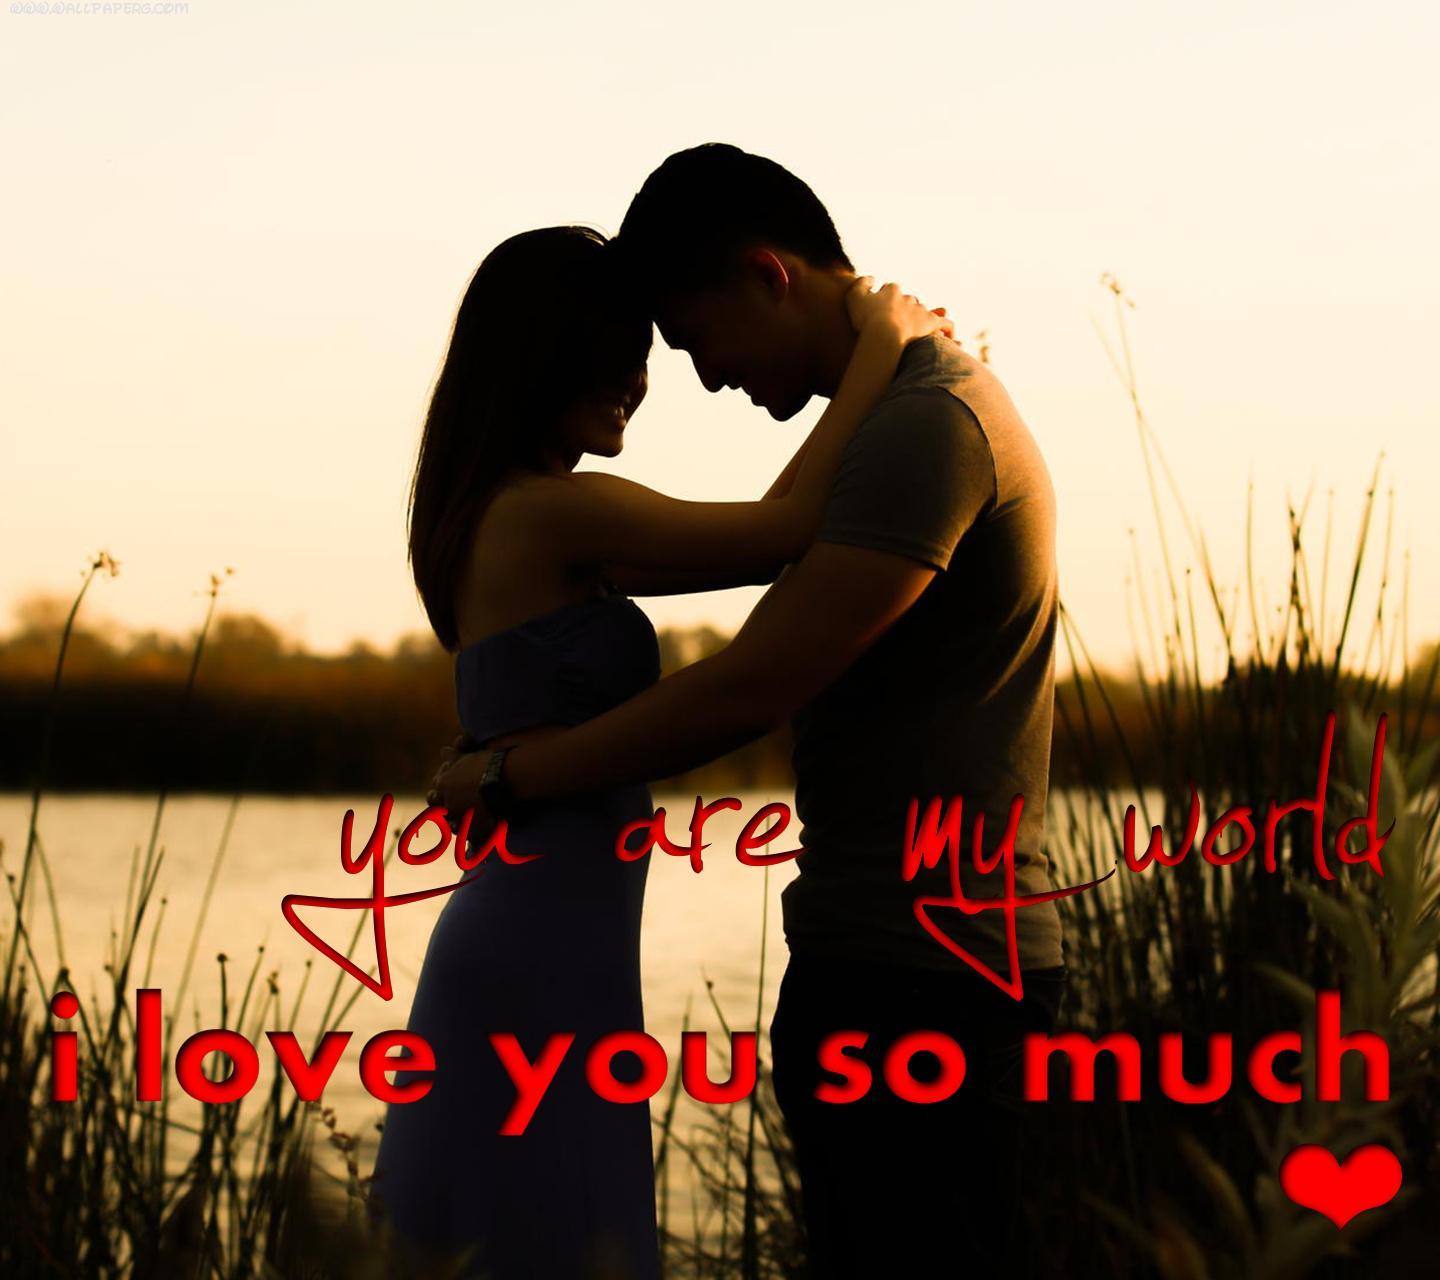 Download I love you(2) - Romantic wallpapers for your mobile cell phone